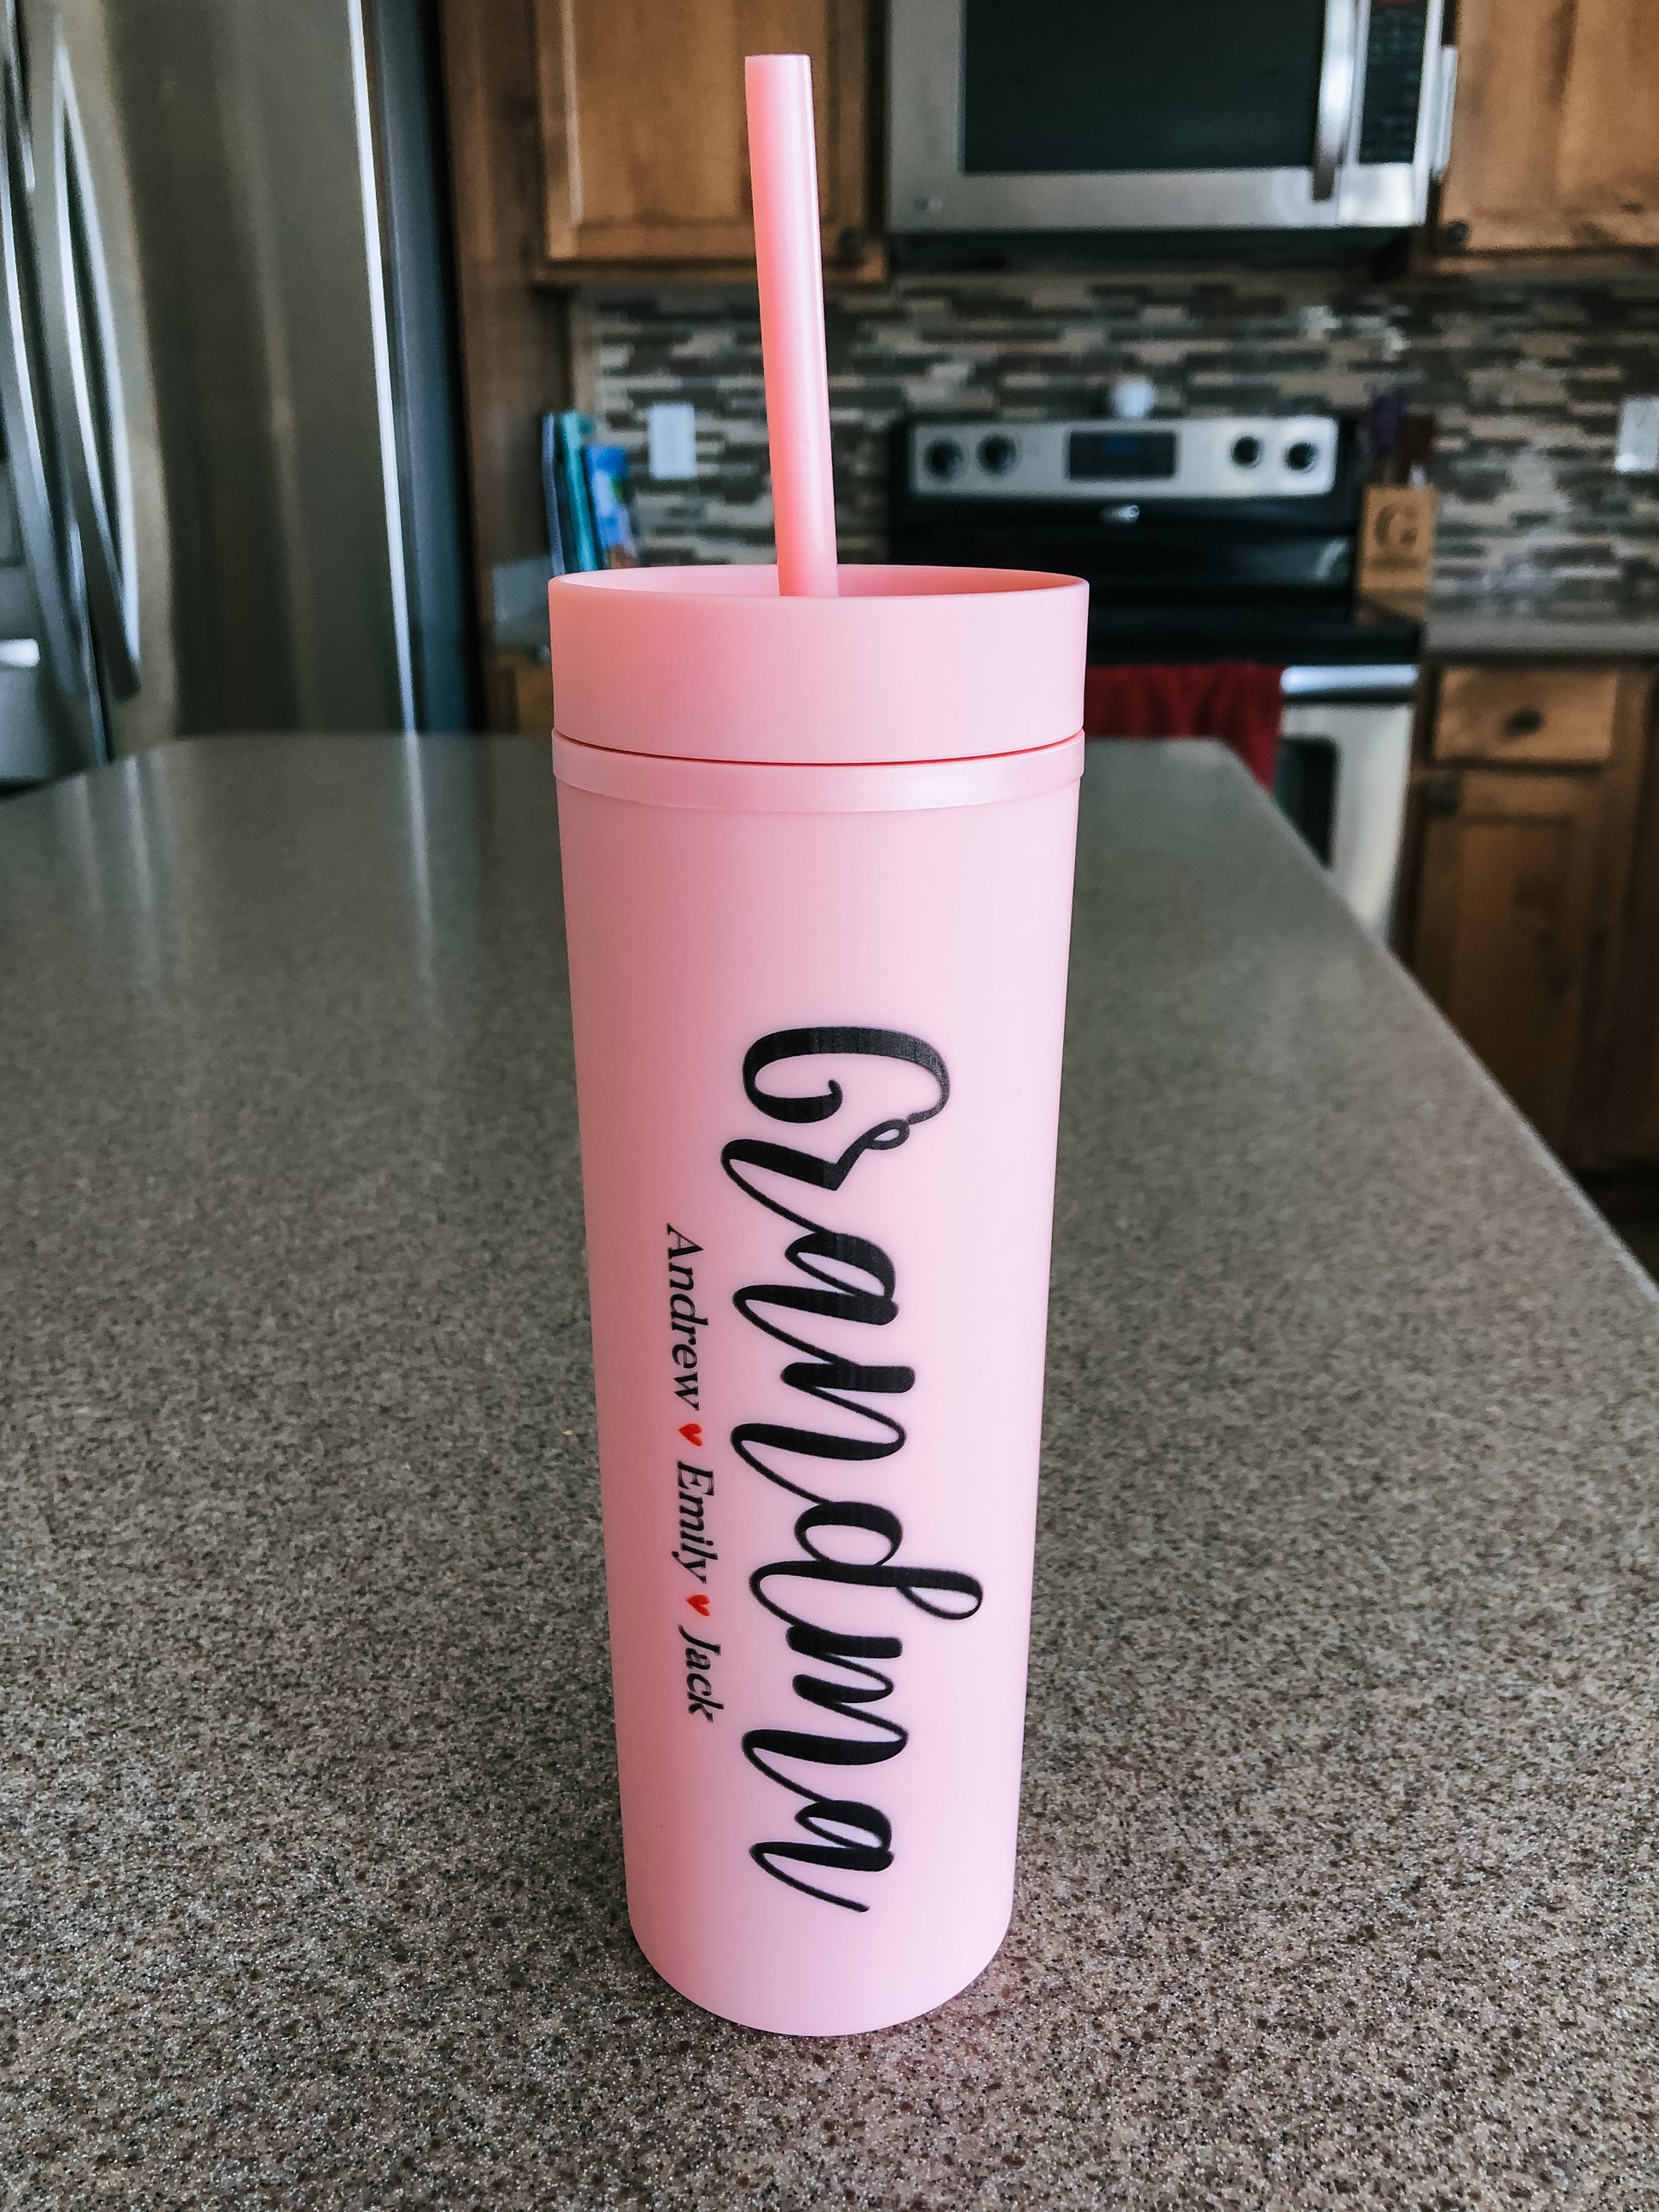 Personalized 16 oz. Matte Pastel Skinny Tumblers with Lids and Straws